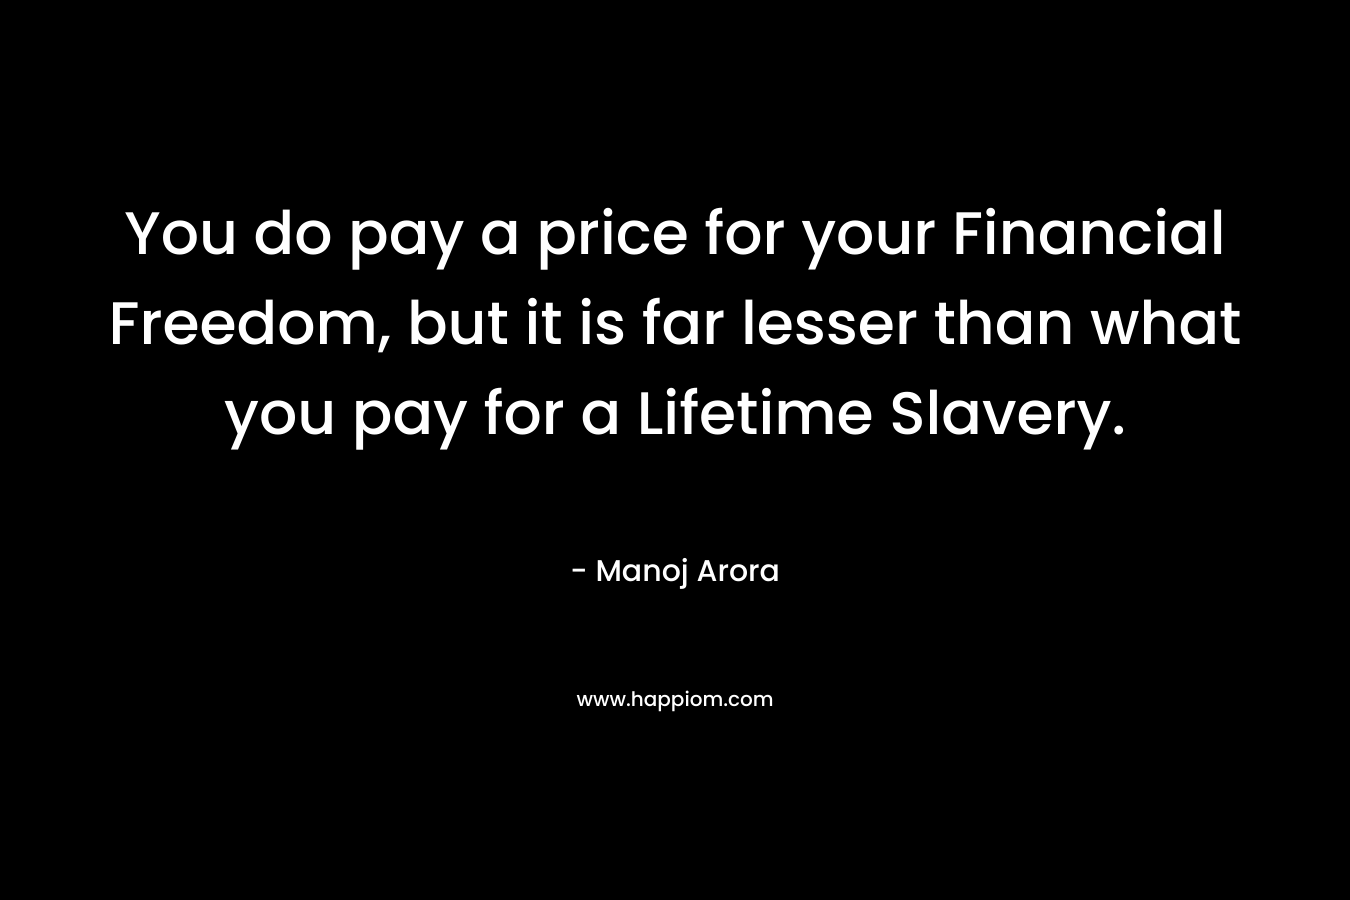 You do pay a price for your Financial Freedom, but it is far lesser than what you pay for a Lifetime Slavery. – Manoj Arora